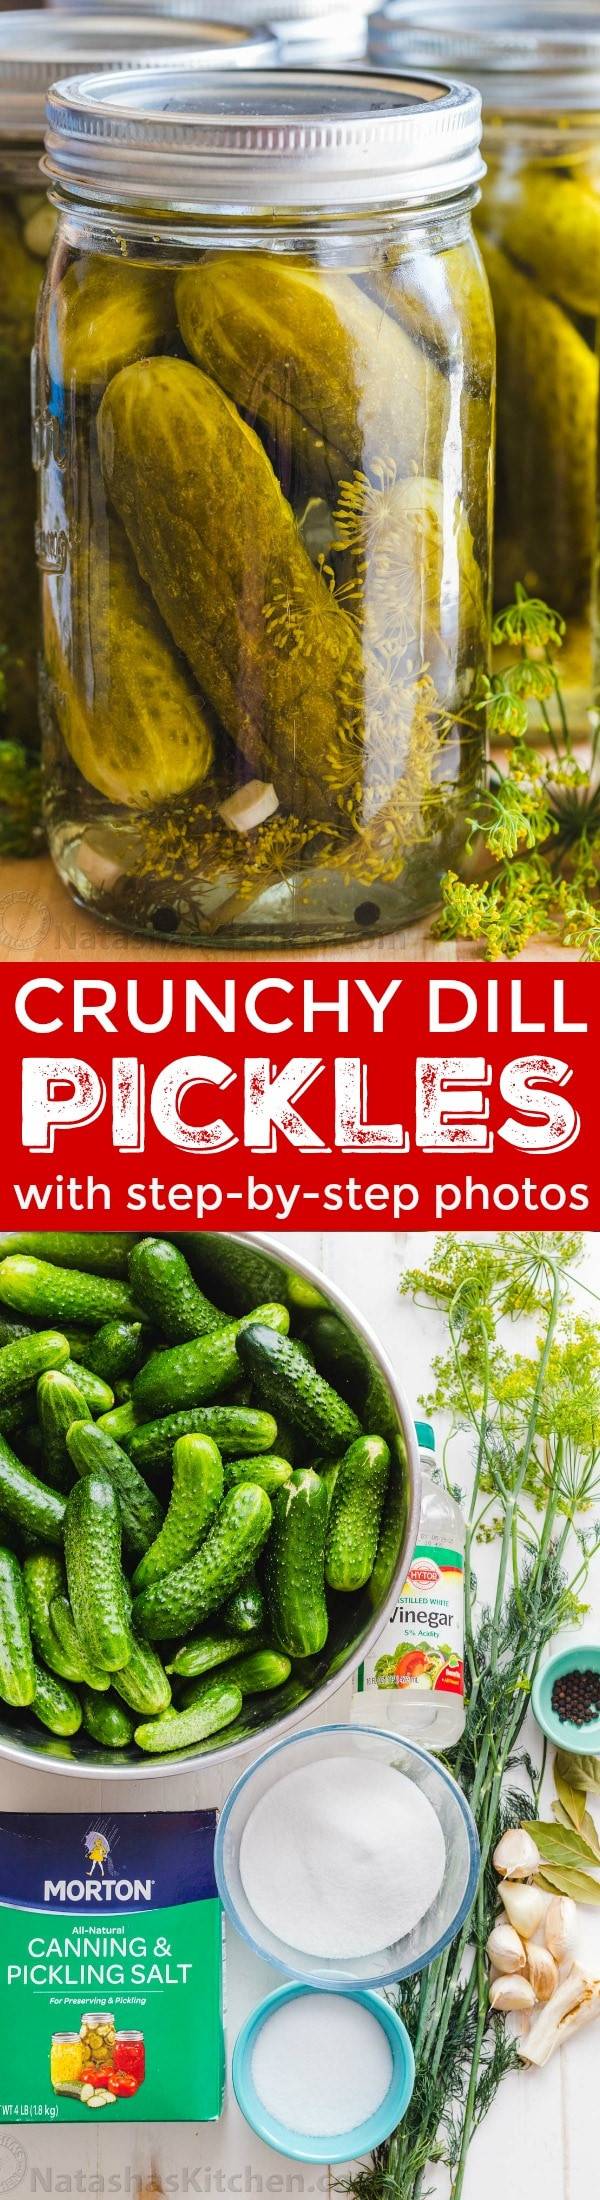 Dill Pickles Recipe For Canning
 Canned Dill Pickle Recipe NatashasKitchen